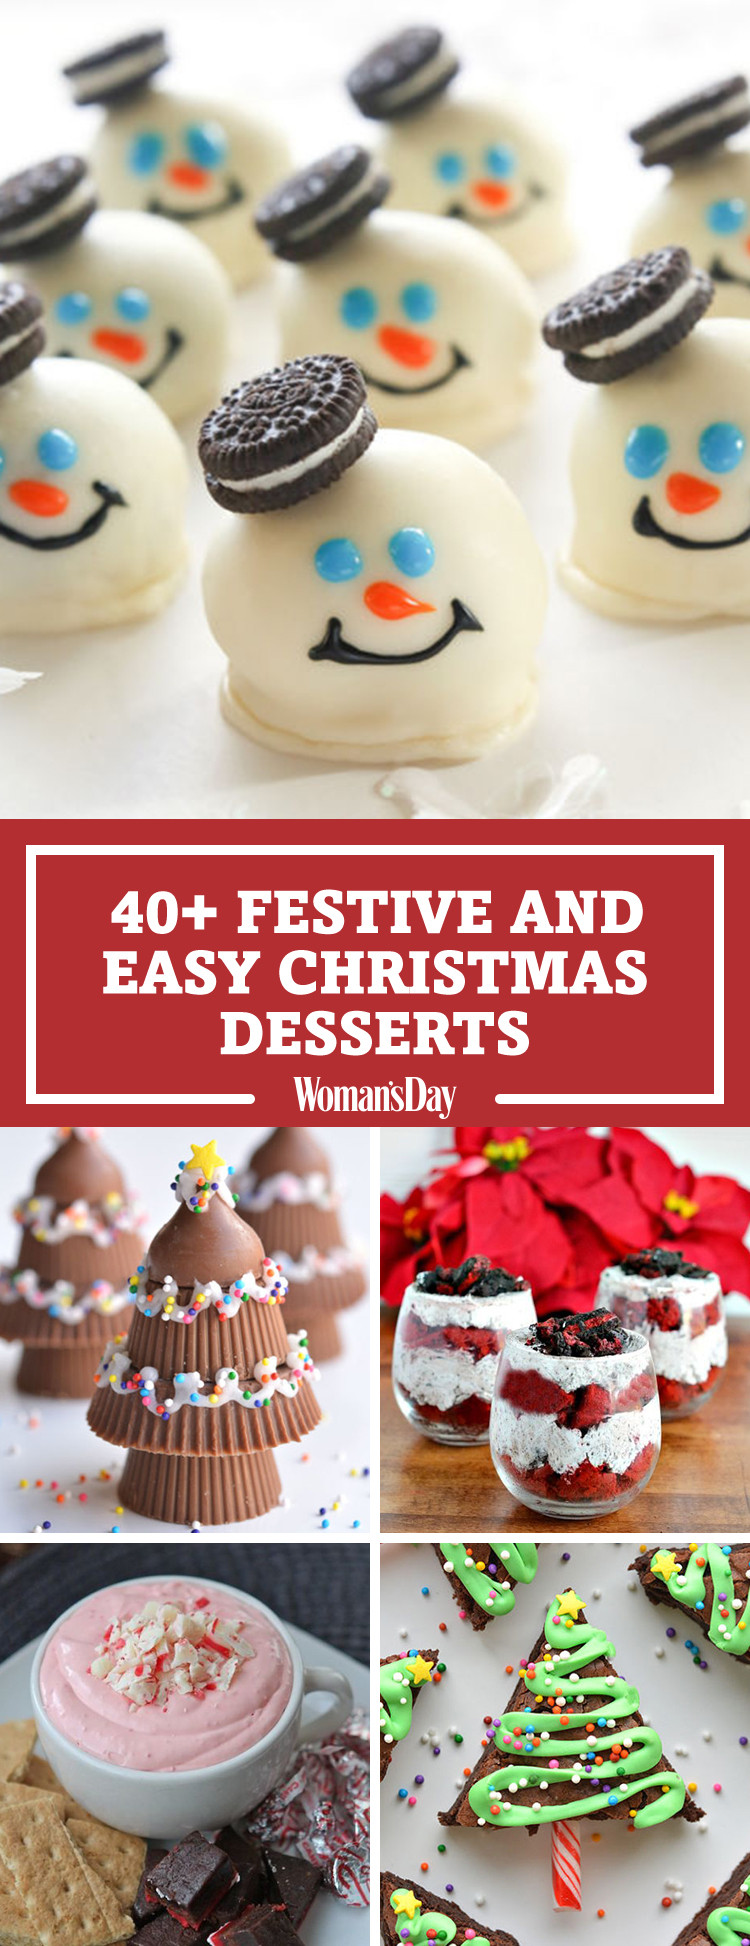 Desserts For The Holiday
 57 Easy Christmas Dessert Recipes Best Ideas for Fun